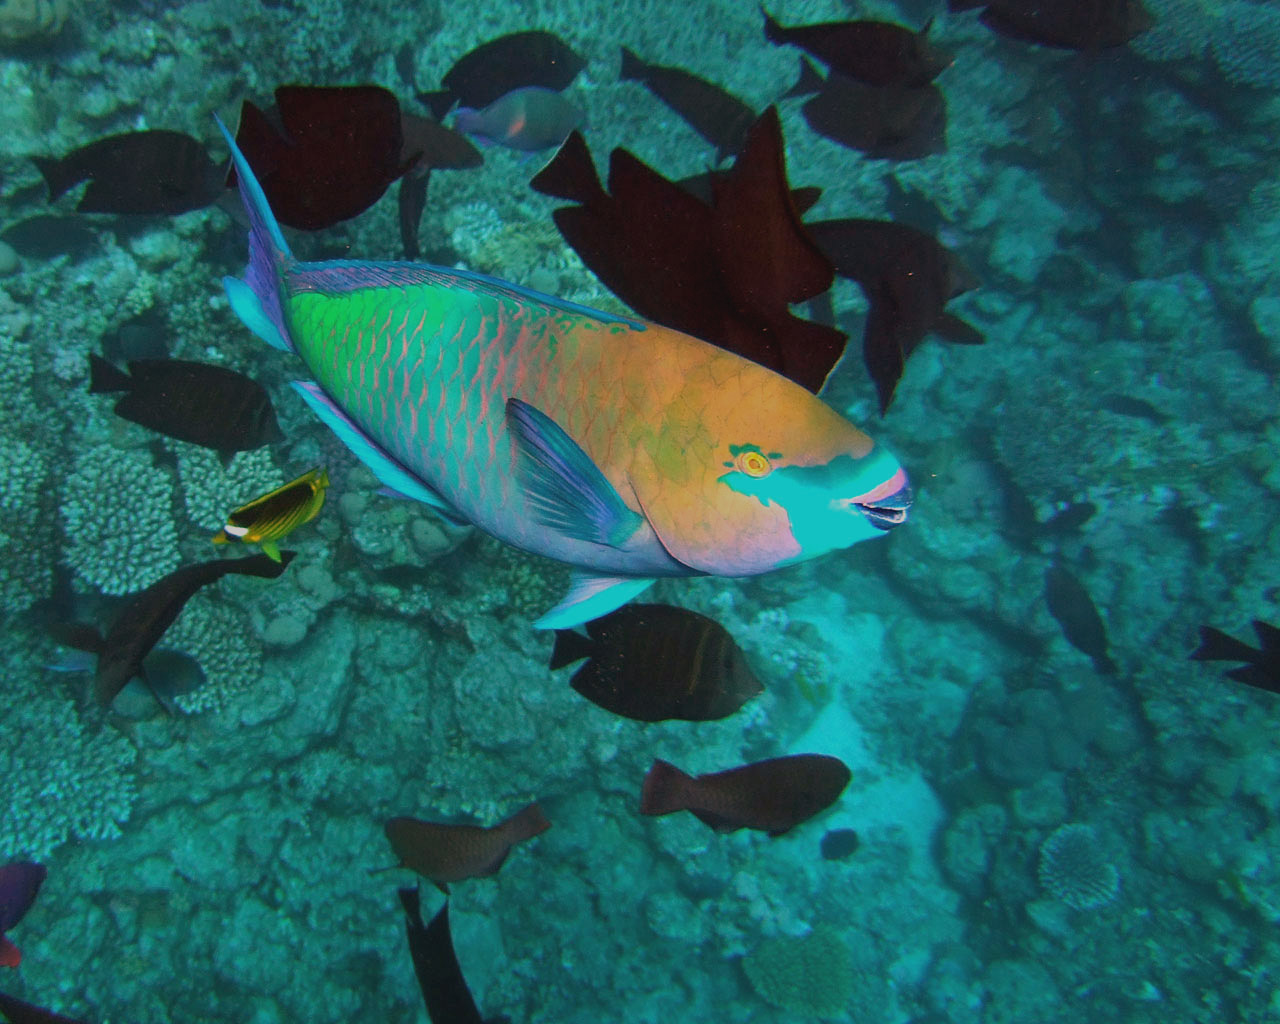 Blue and green parrot fish has got a beak for crashing corals.